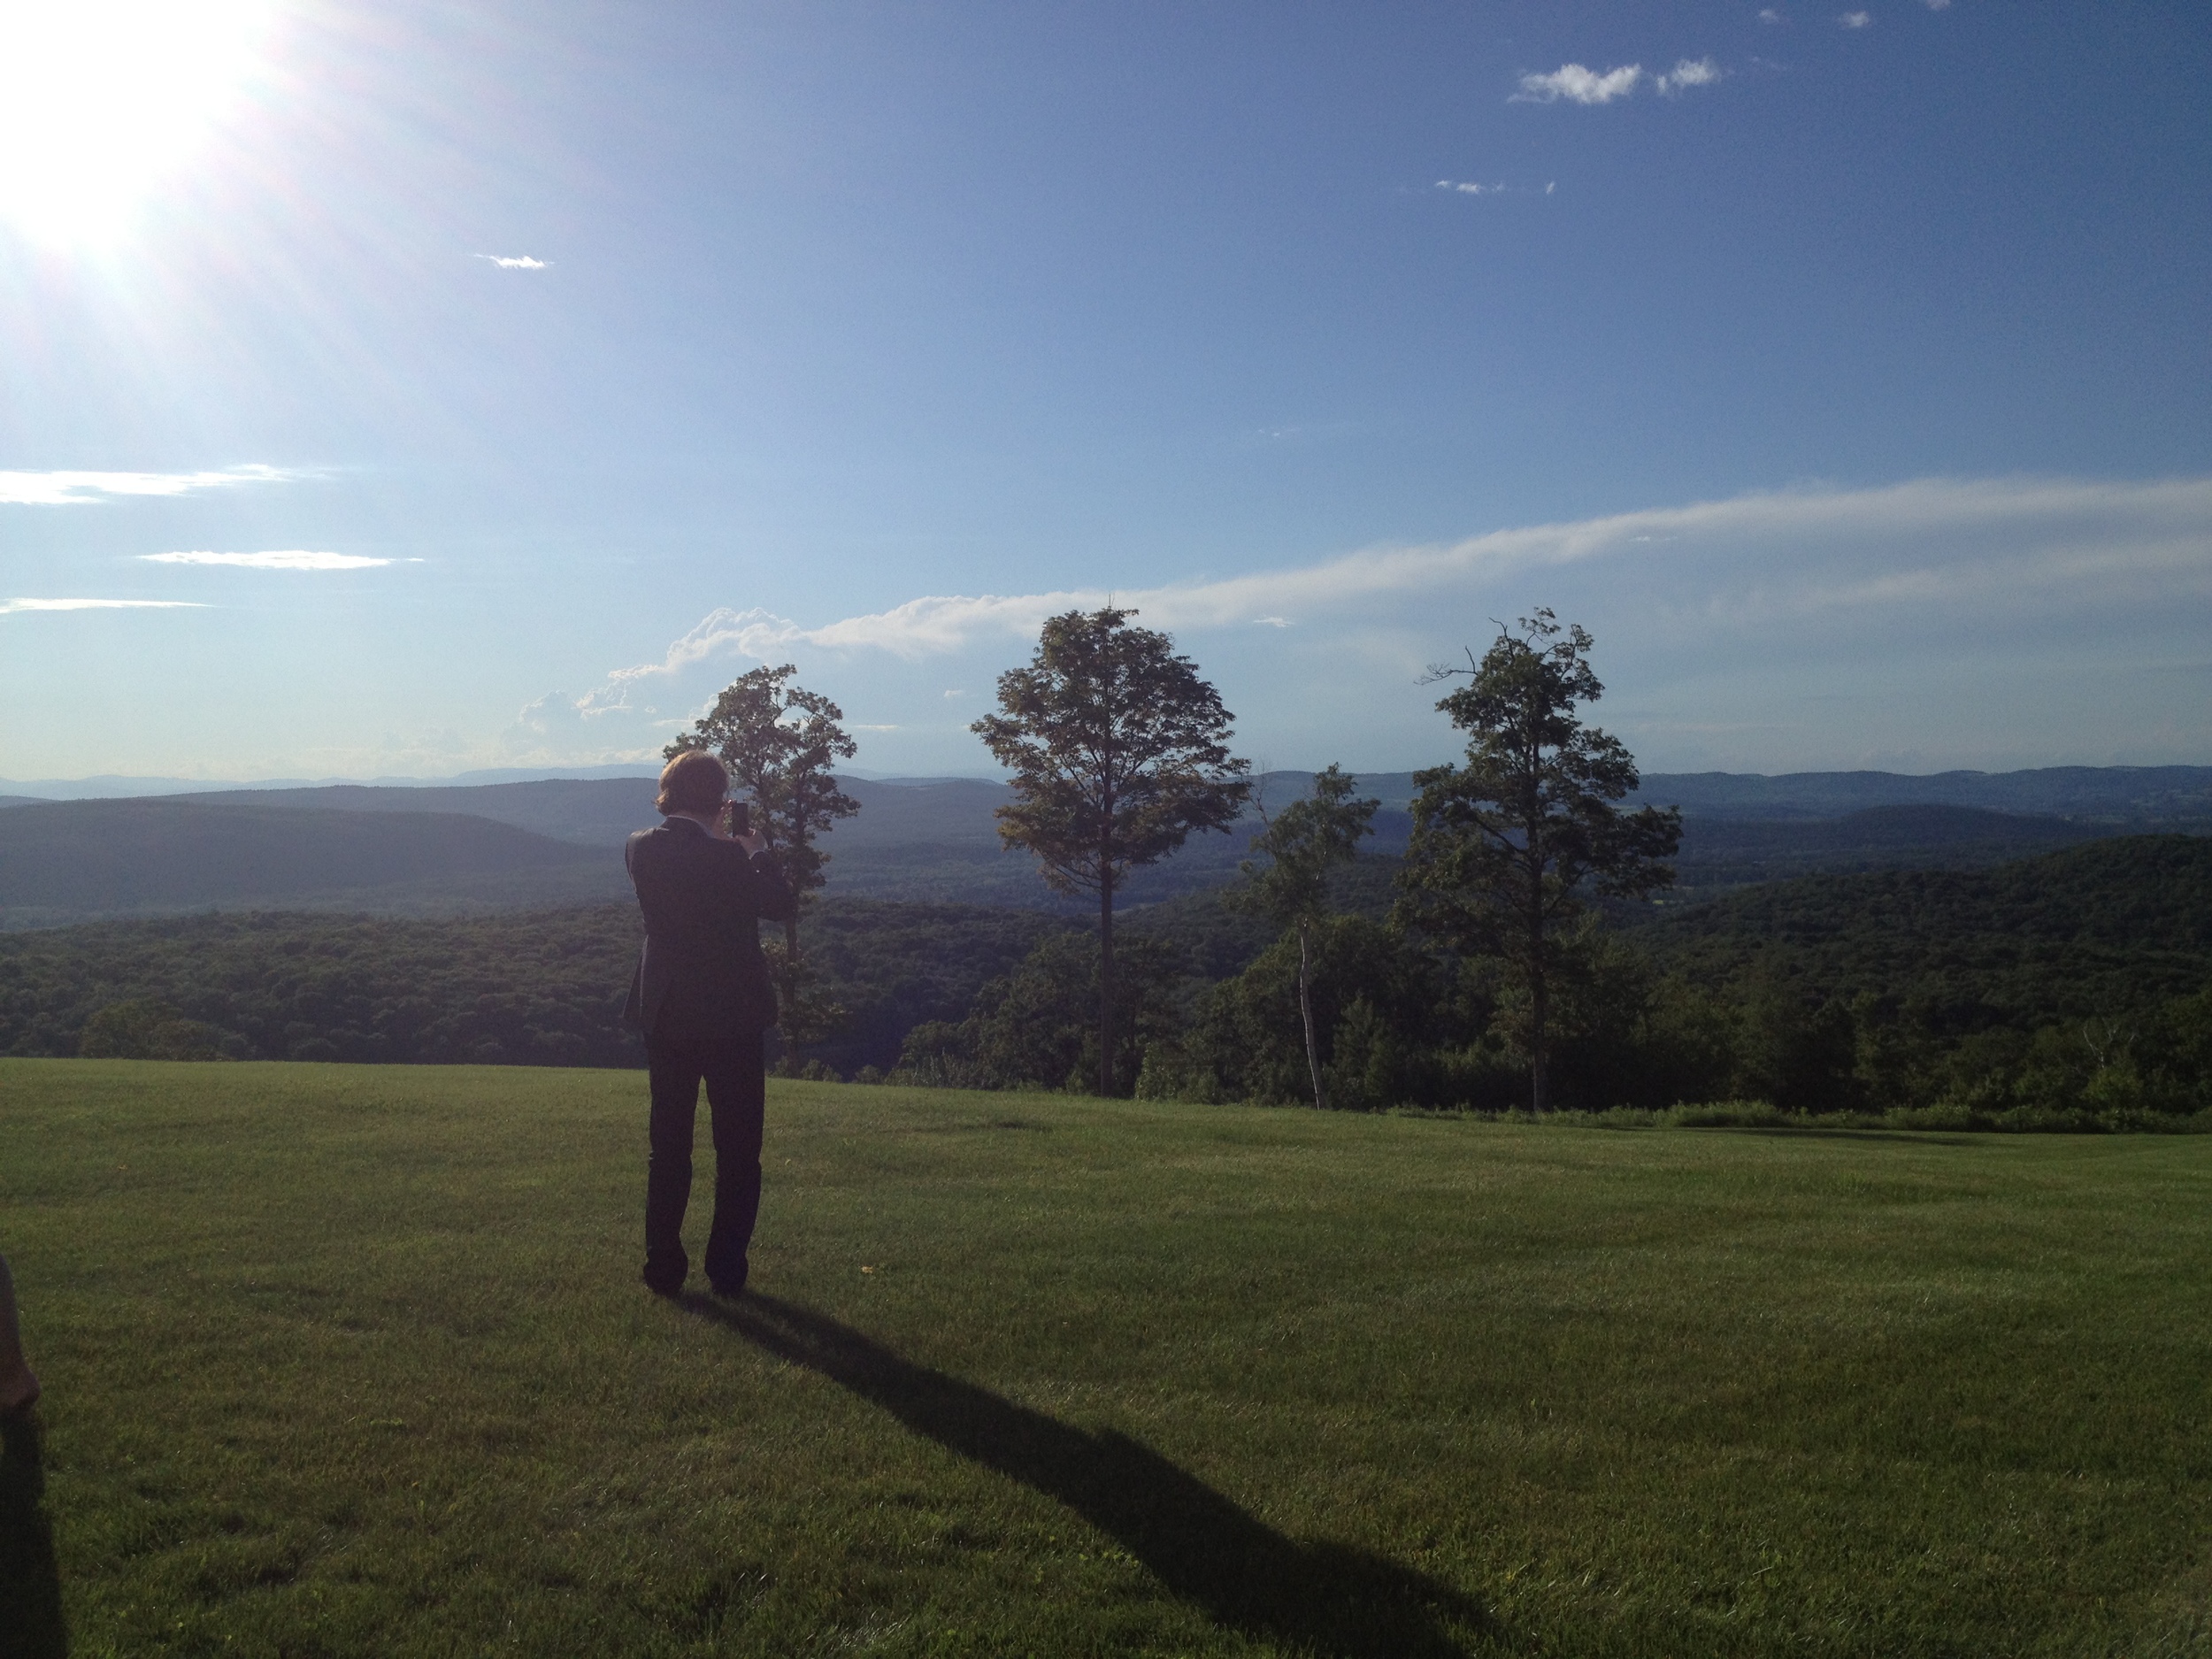 Robert takes in the view - NY 2013